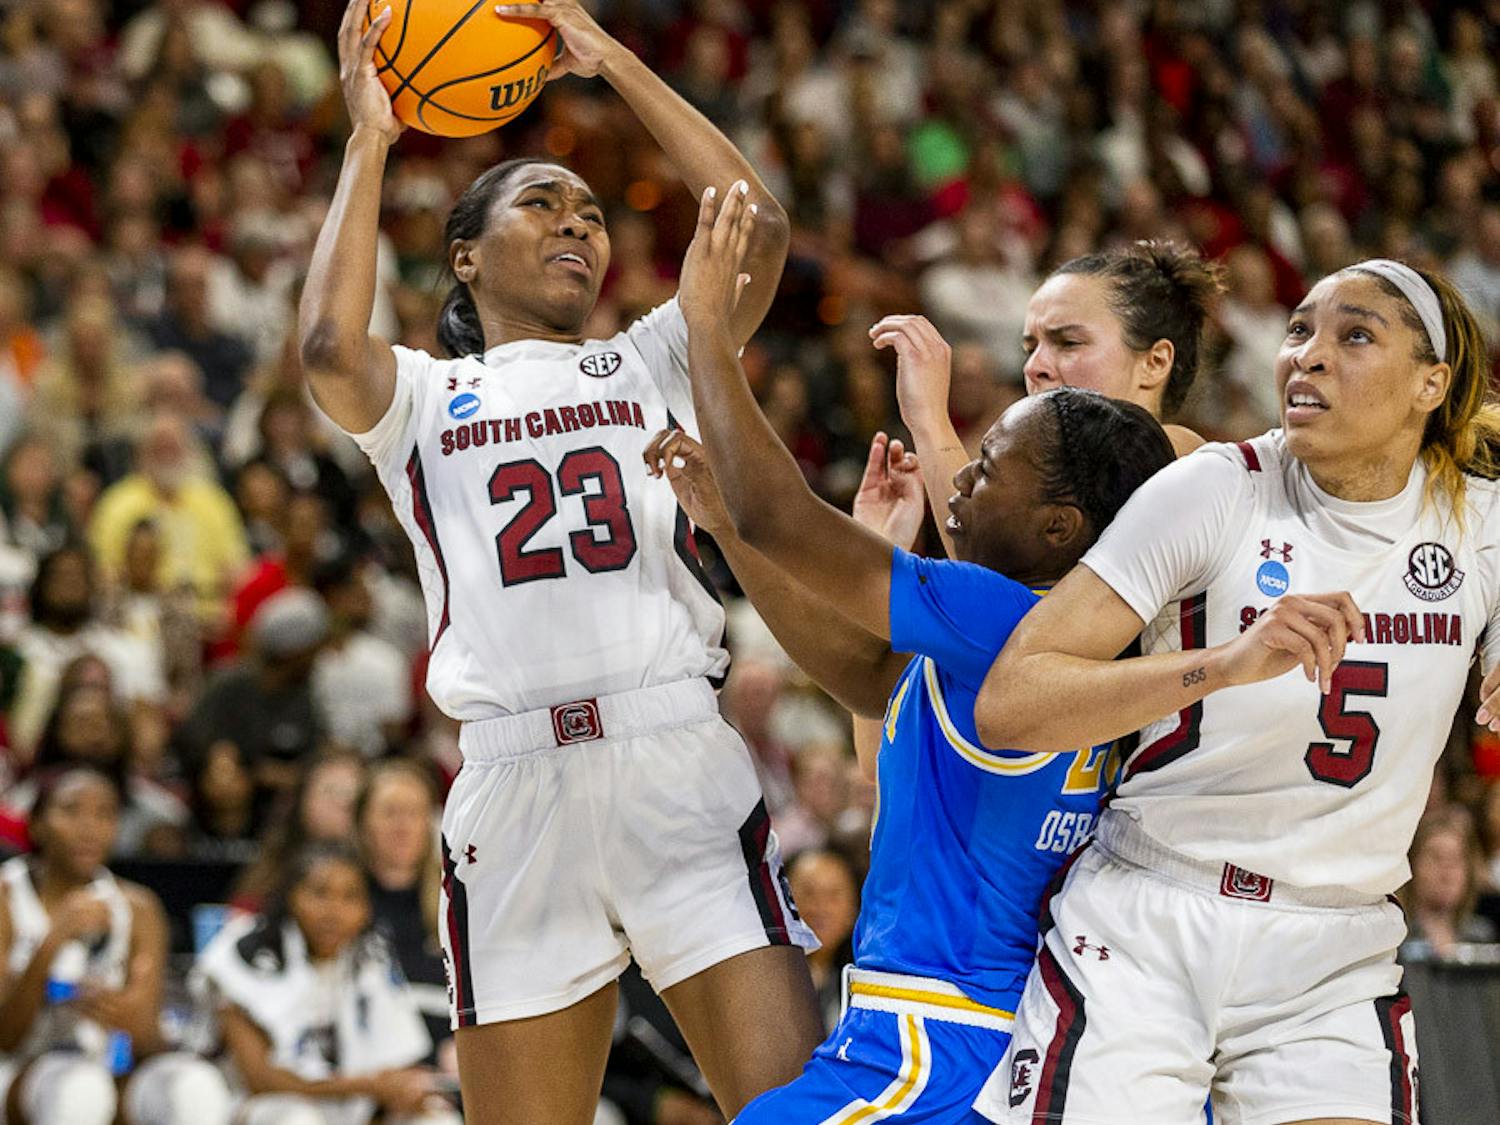 Sophomore guard Bree Hall attempts to make a point during the matchup between South Carolina and UCLA at Bon Secours Wellness Arena in Greenville, South Carolina, on March 25, 2023. The Gamecocks beat the Bruins 59-43 and will move on to the Elite Eight tournament.&nbsp;